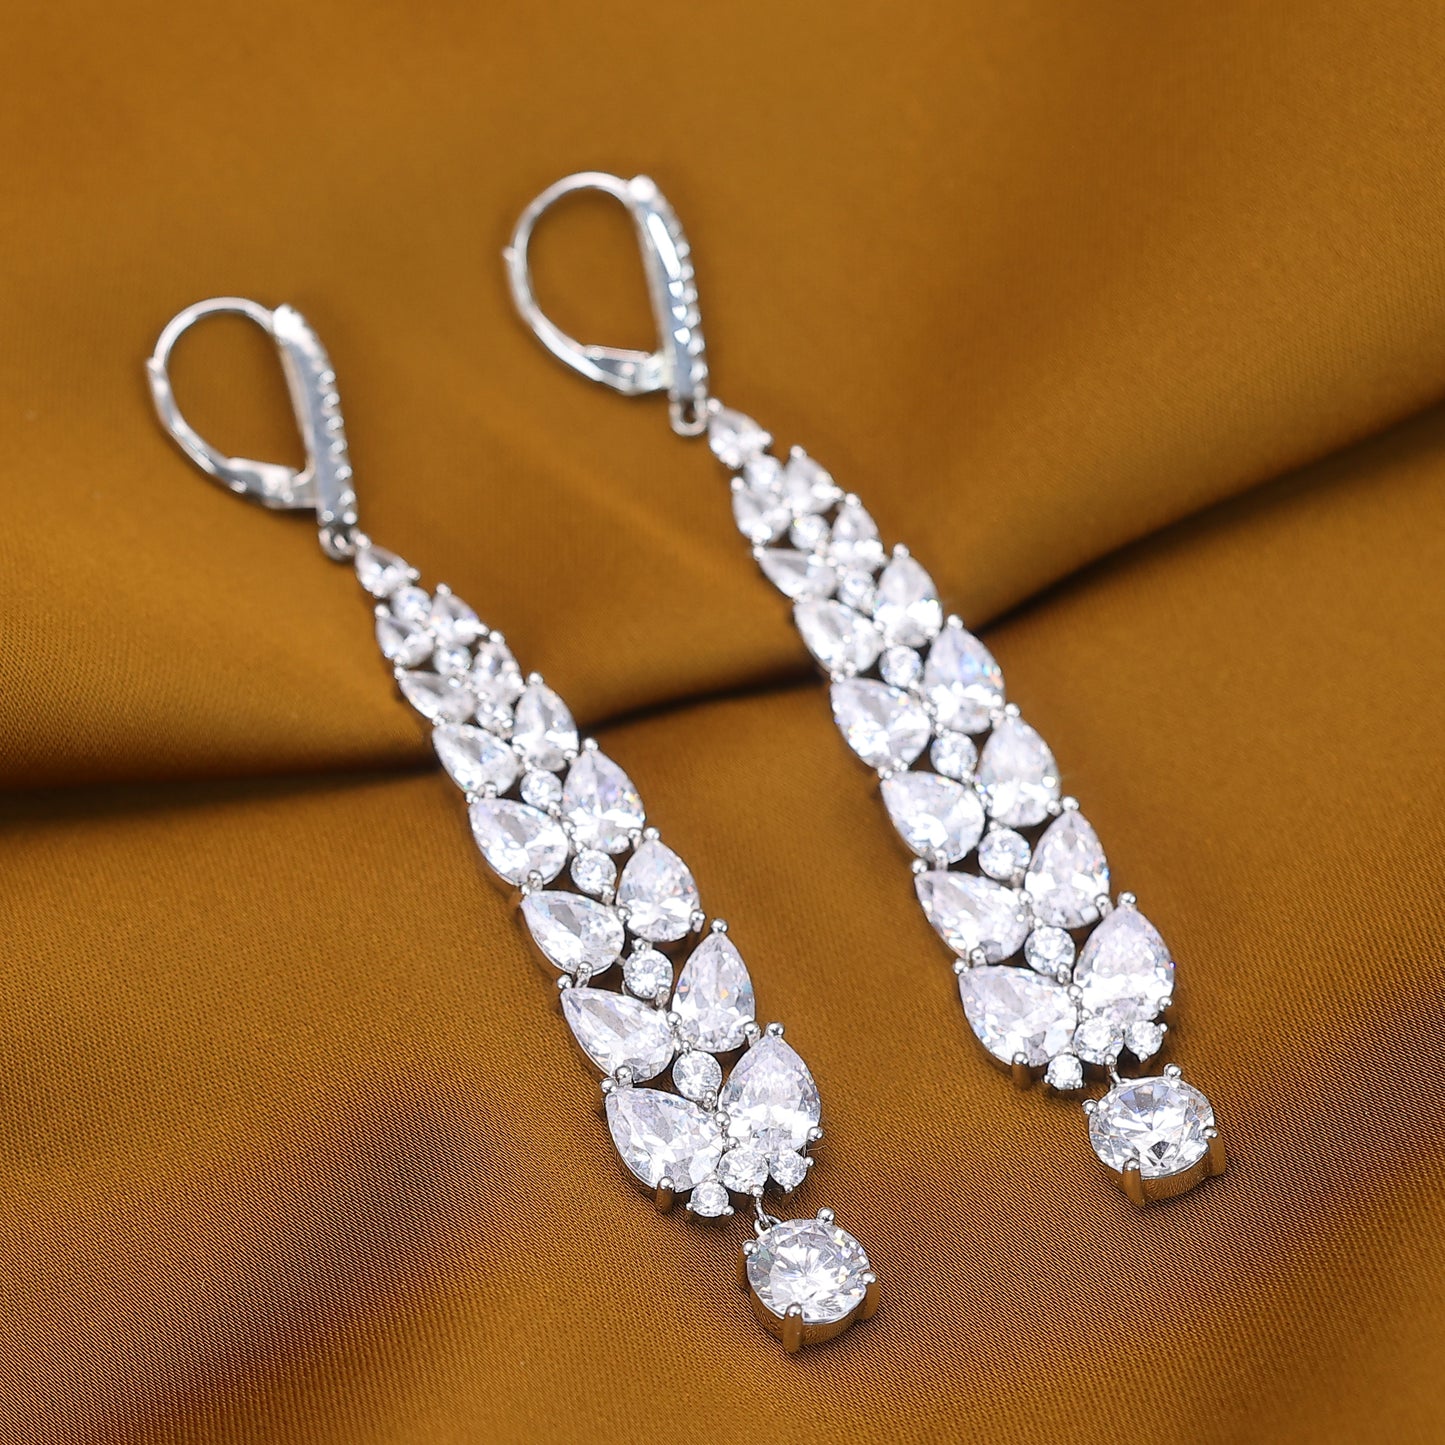 Only 1 Special offer Micro-setting Clear color lab created stones teardrop dangle earrings, sterling silver